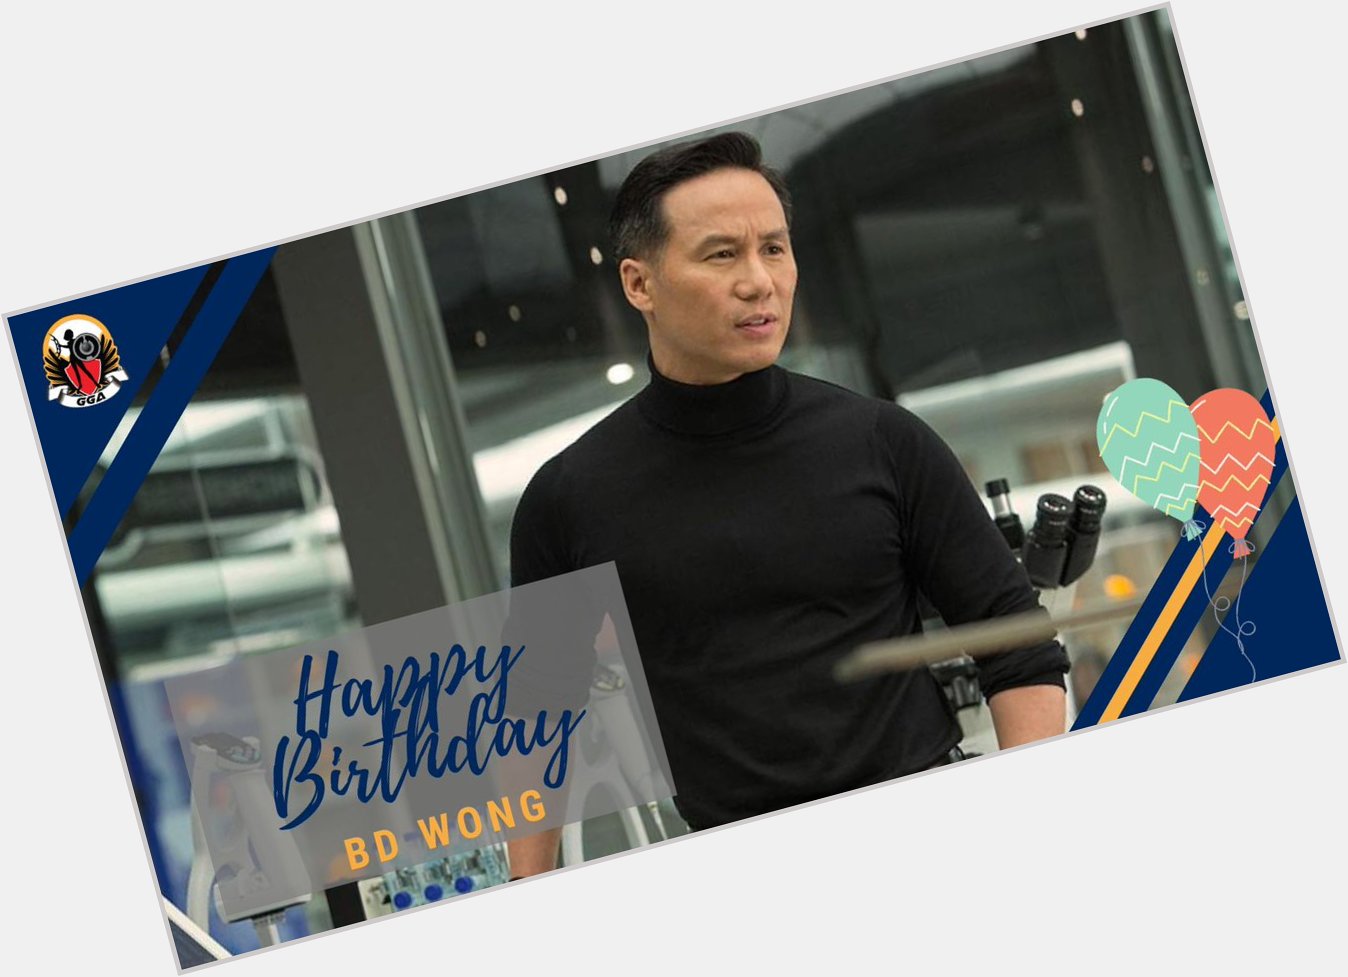 Happy Birthday, BD Wong!  What role of his is your favorite?  